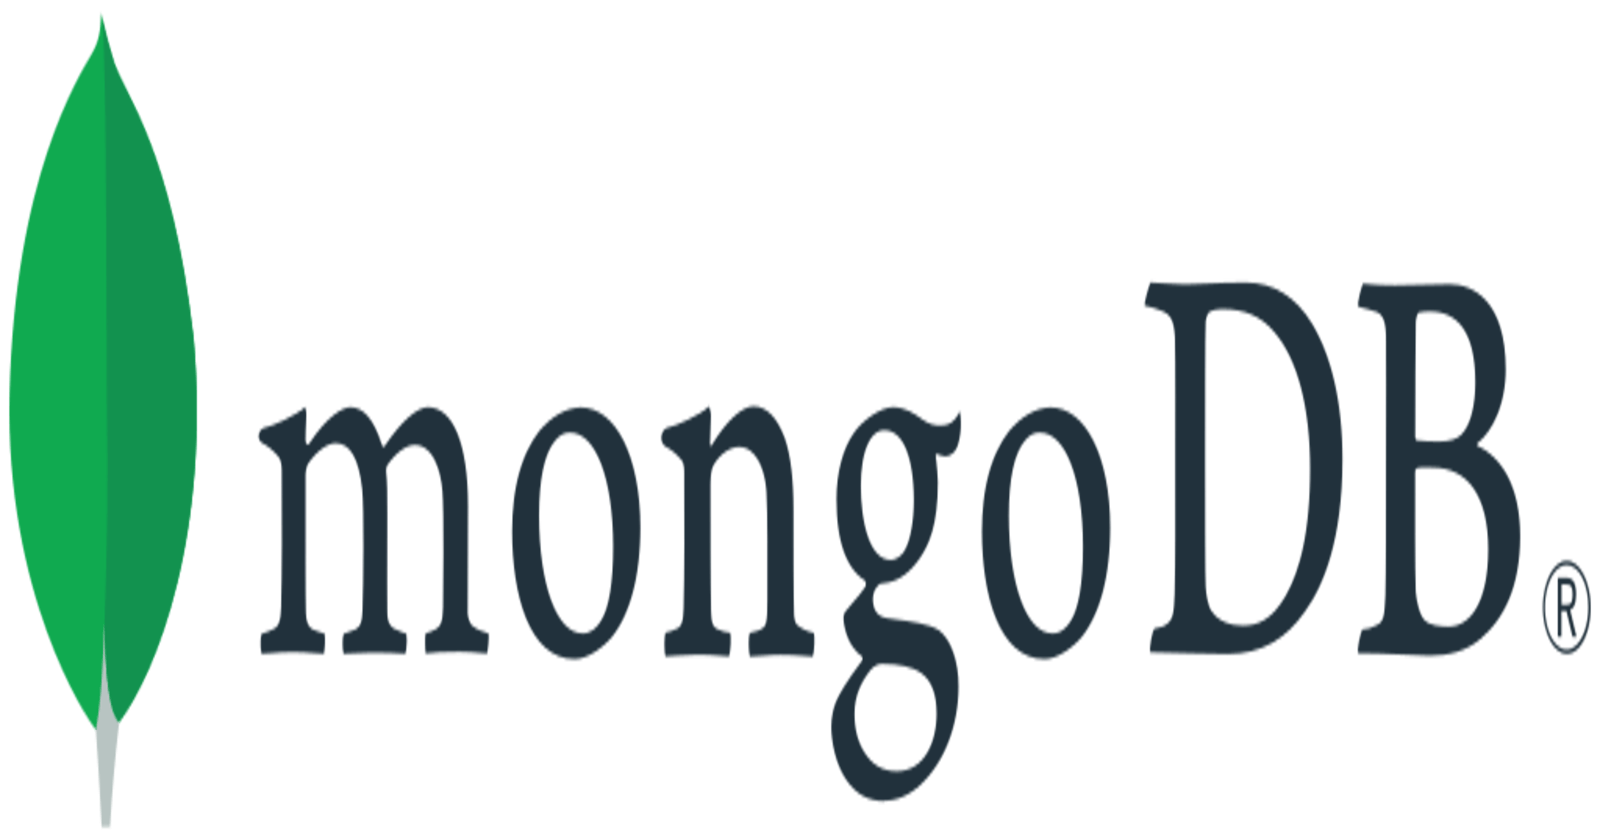 How To Find Data In A Collection Using MongoDB?